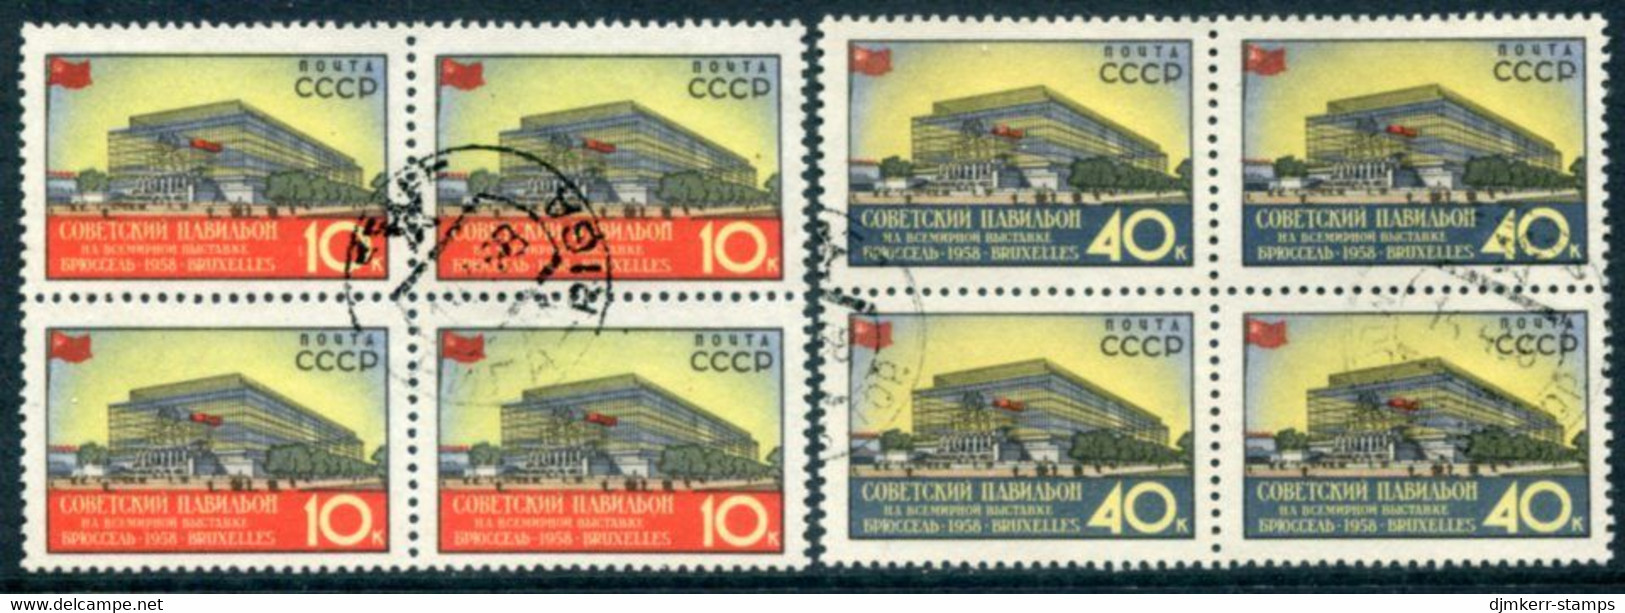 SOVIET UNION 1958 World Exhibition Perforated Blocks Of 4 Used .  Michel 2068-69 A - Usati